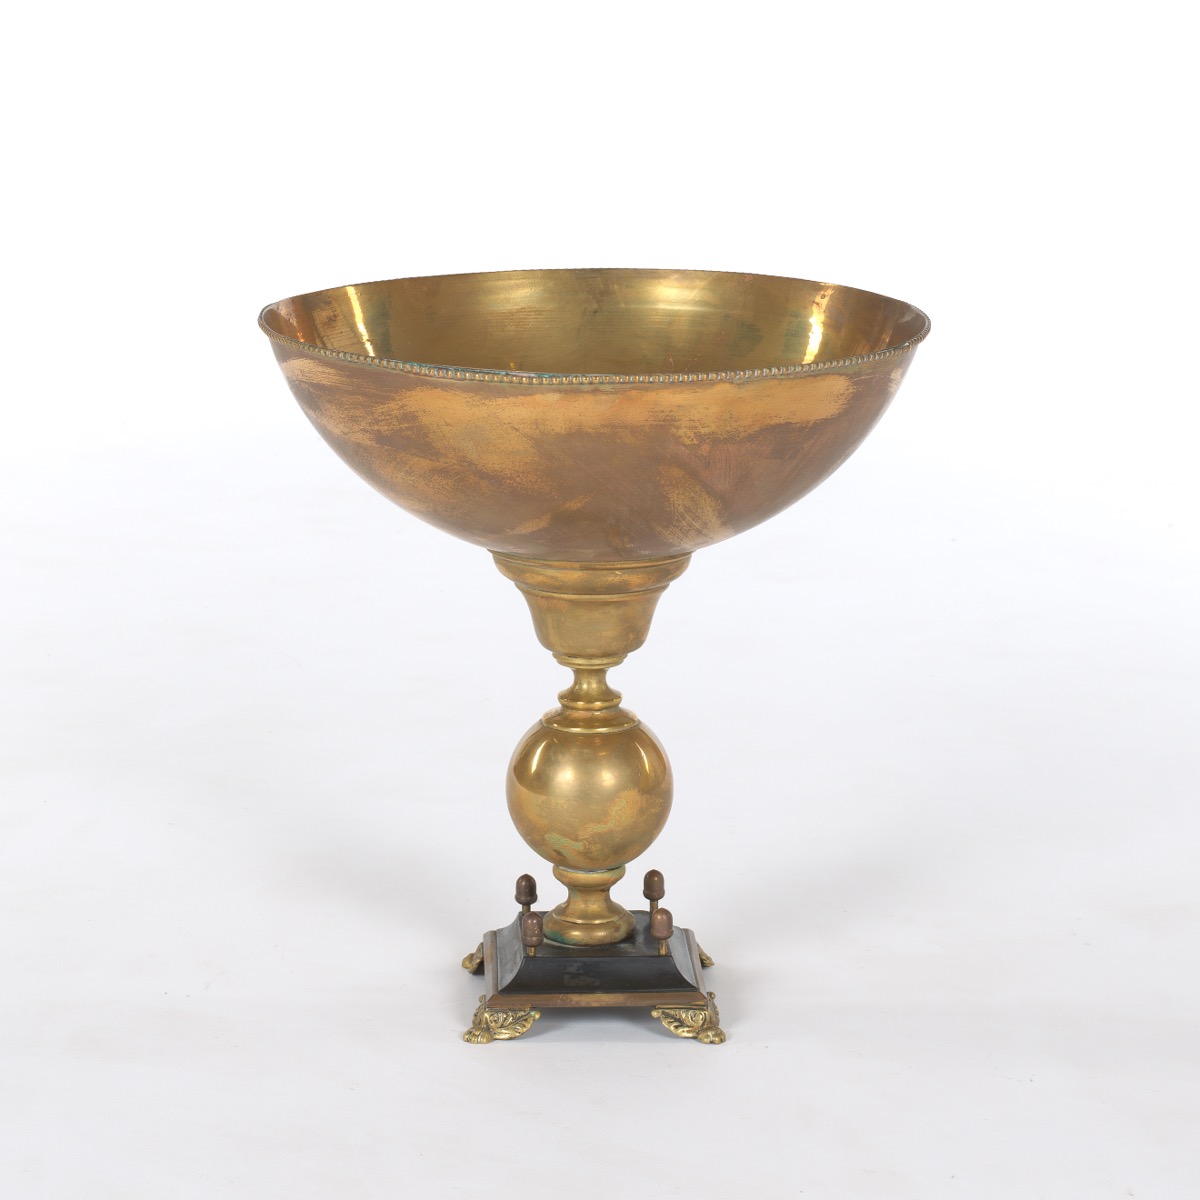 French Patinated Brass and Black Slate Centerpiece Bowl, ca. 19th Century - Image 2 of 7